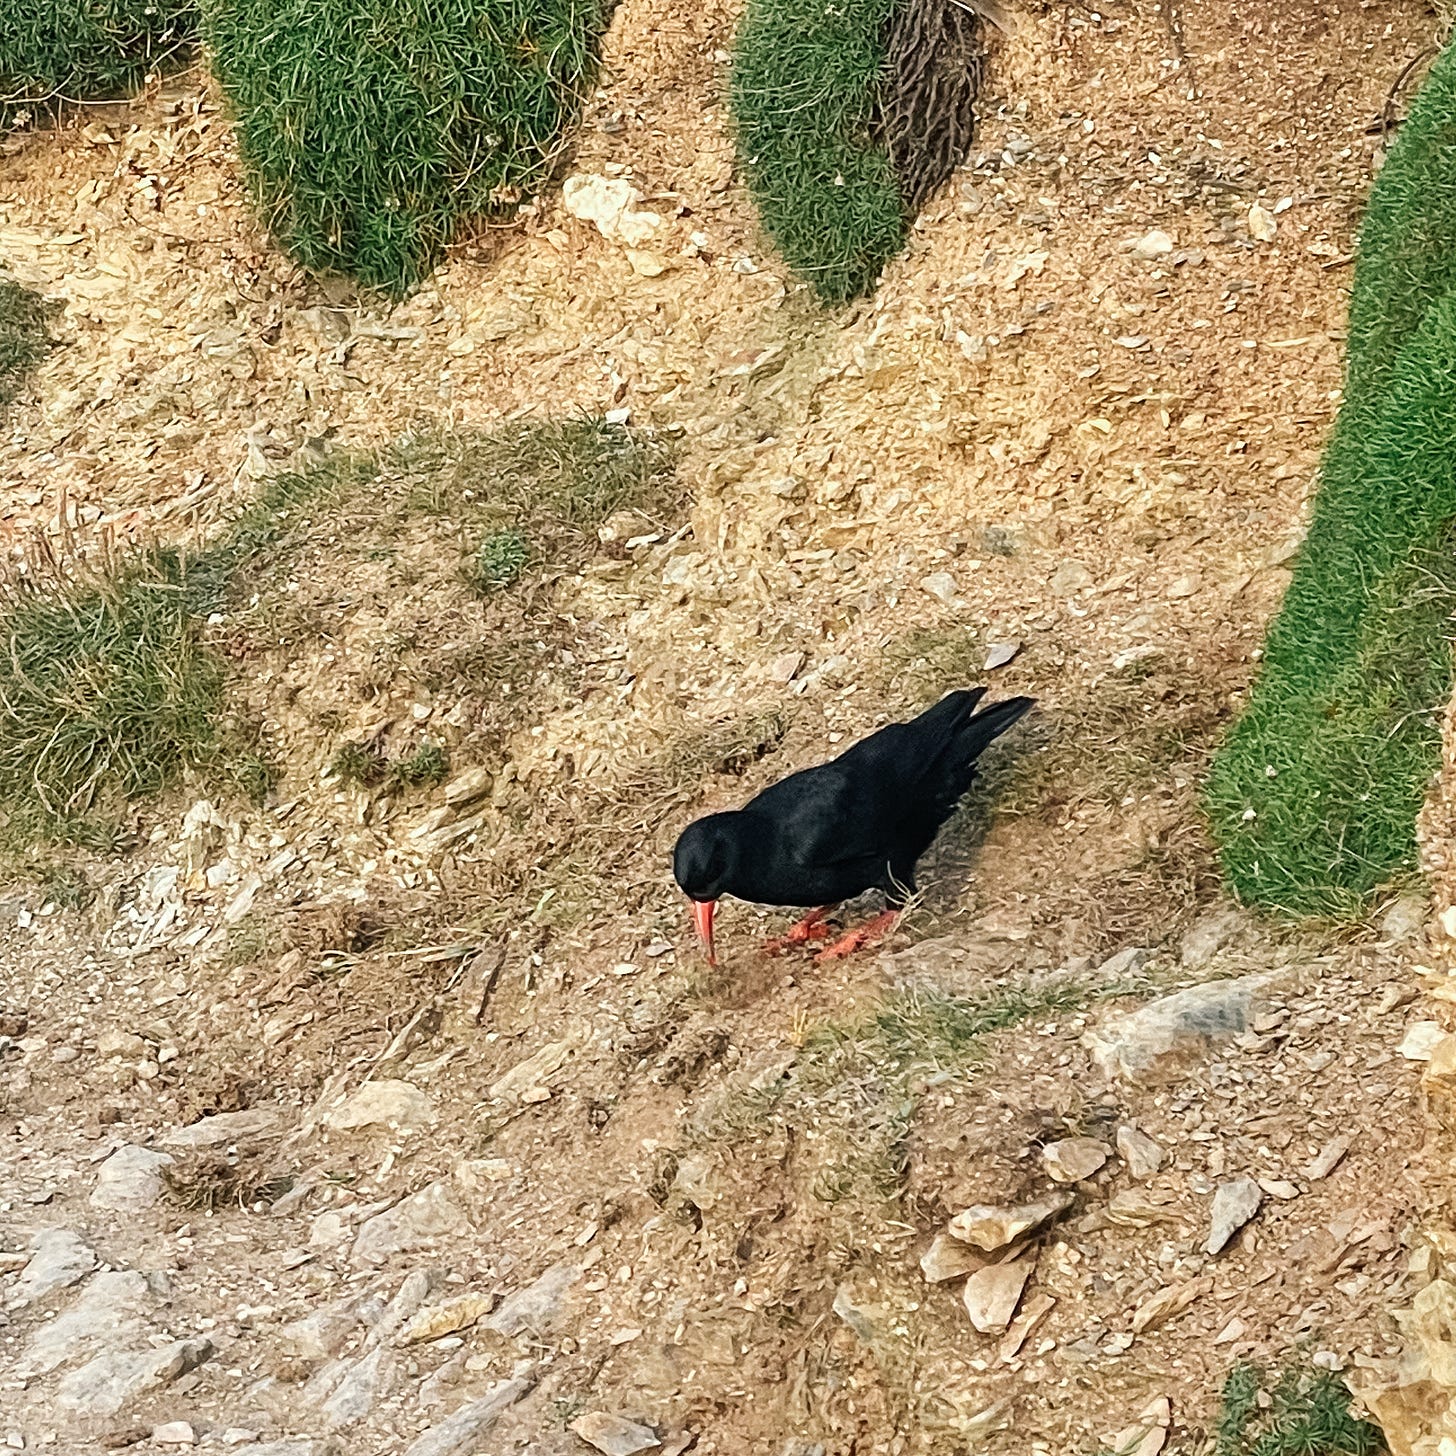 A chough (a black bird with a red bill and legs) pecks at loose earth